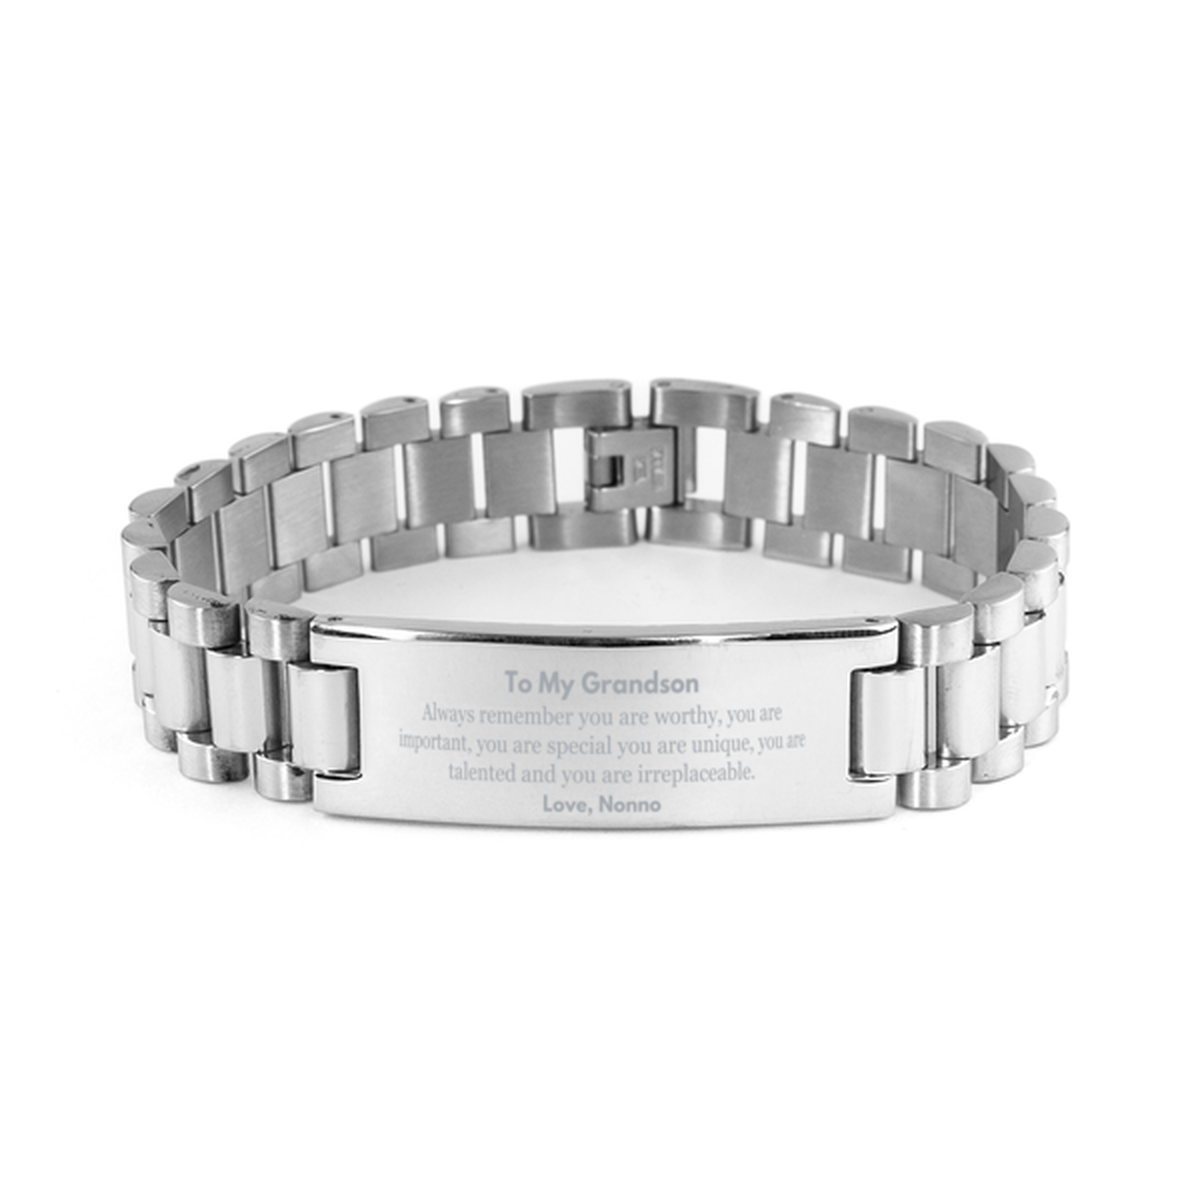 Grandson Birthday Gifts from Nonno, Inspirational Ladder Stainless Steel Bracelet for Grandson Christmas Graduation Gifts for Grandson Always remember you are worthy, you are important. Love, Nonno